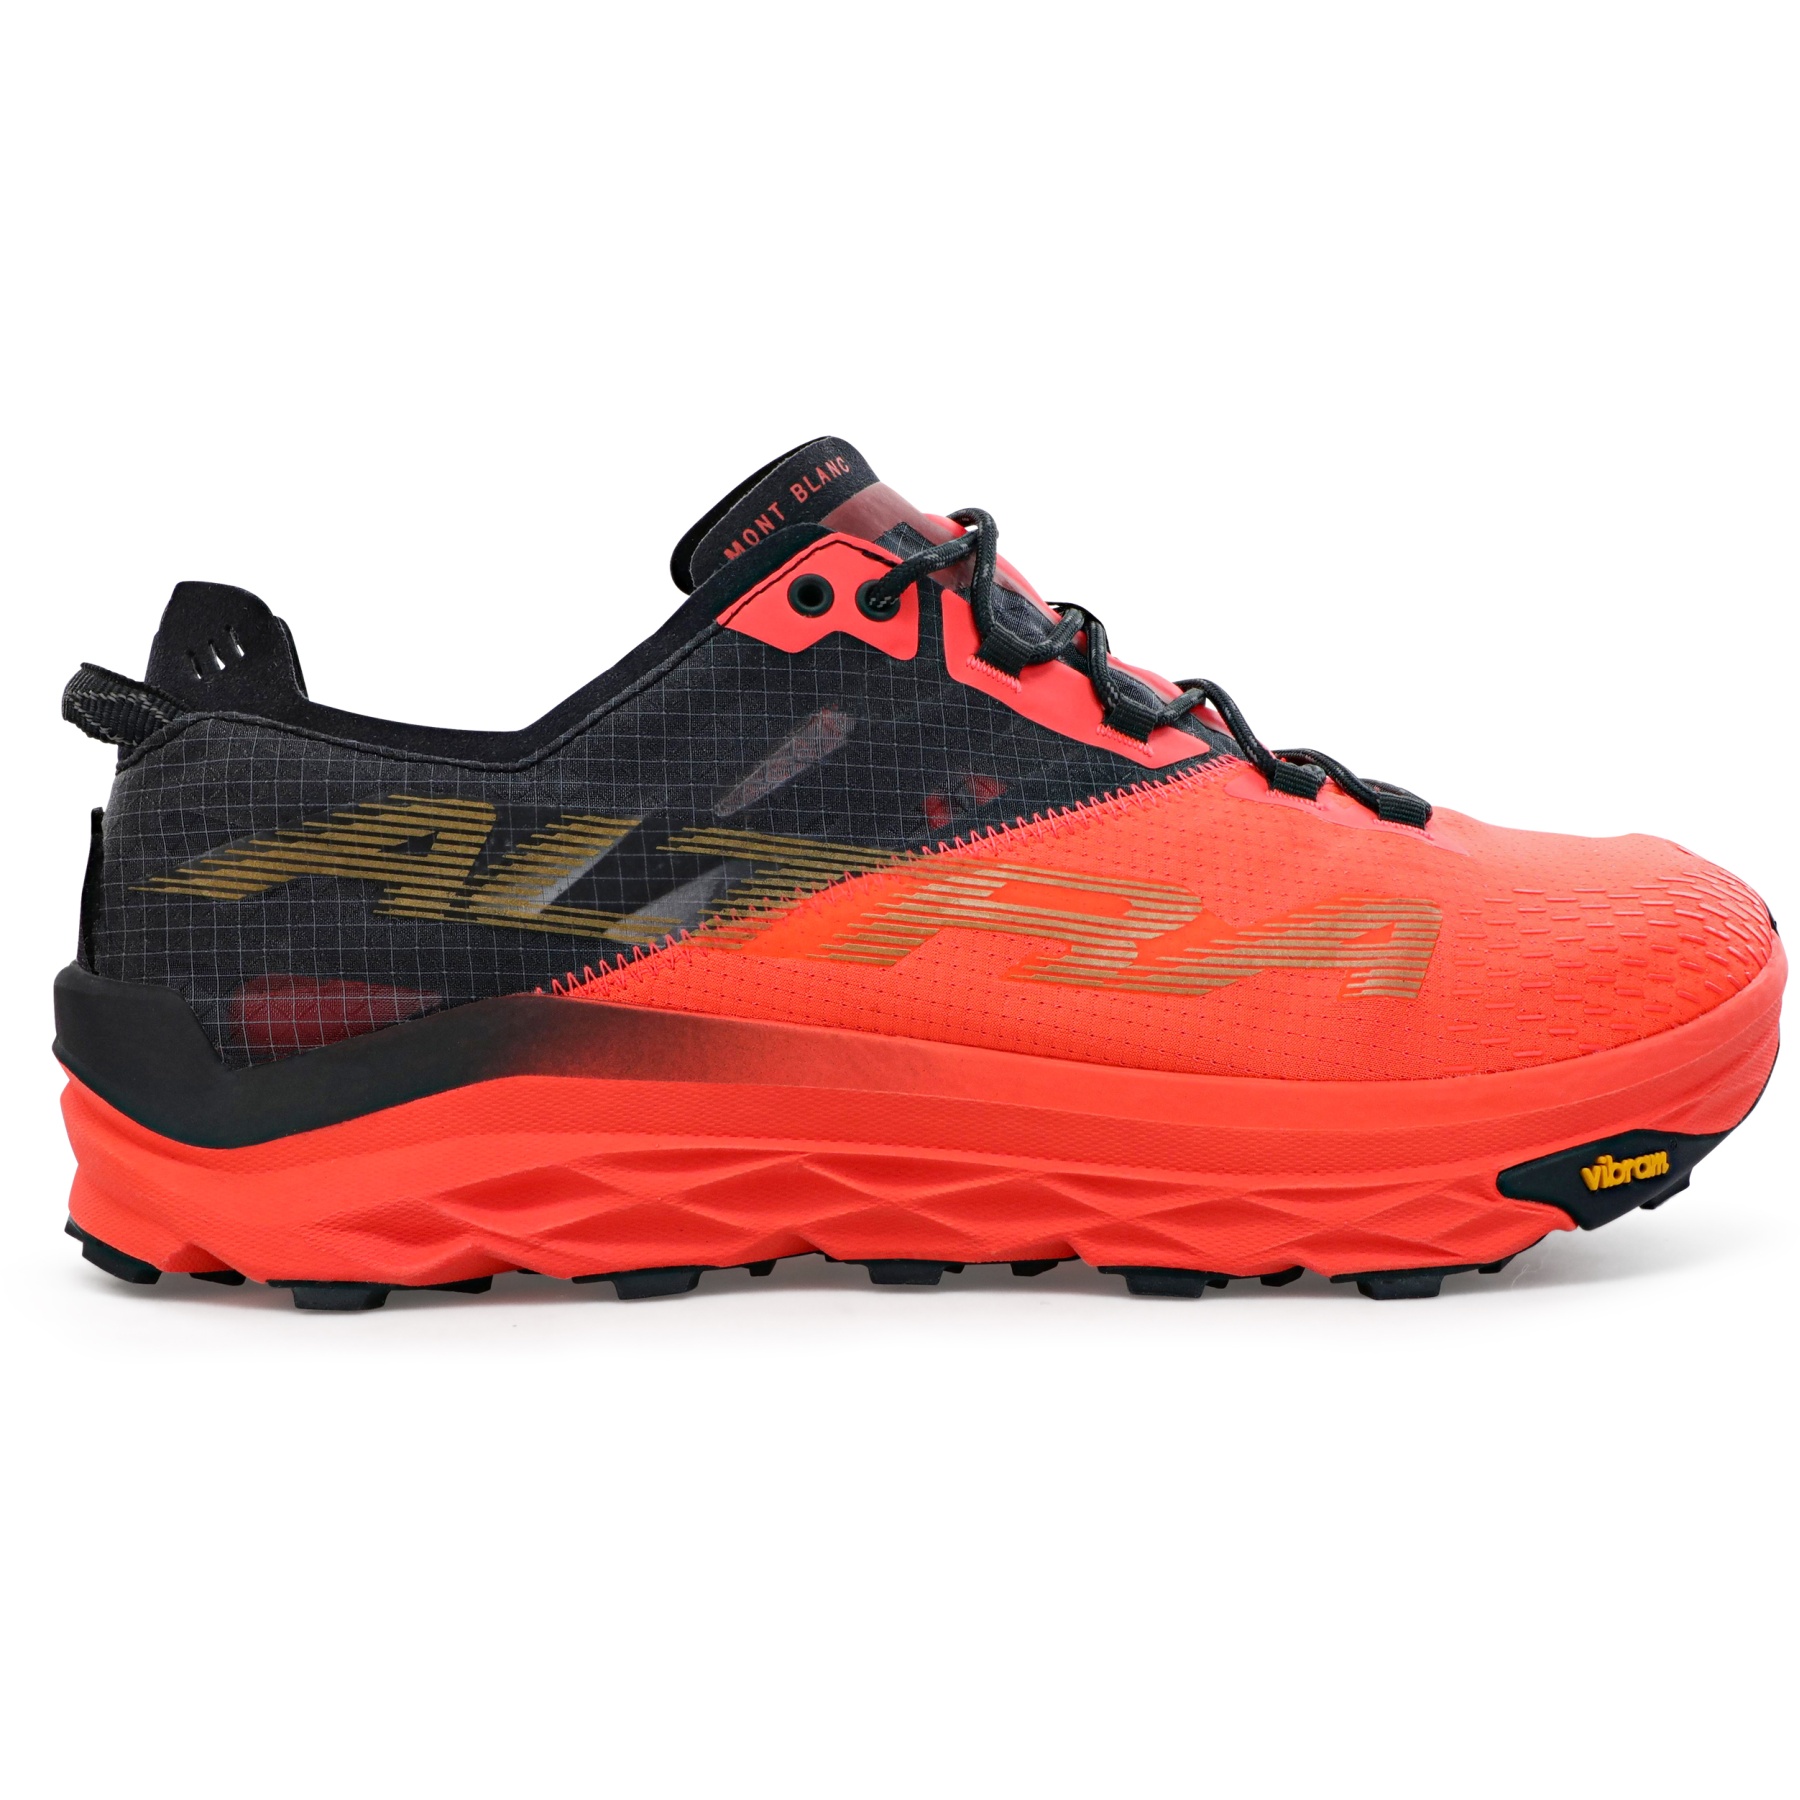 Image of Altra Mont Blanc Women's Trail Running Shoes - Coral/Black